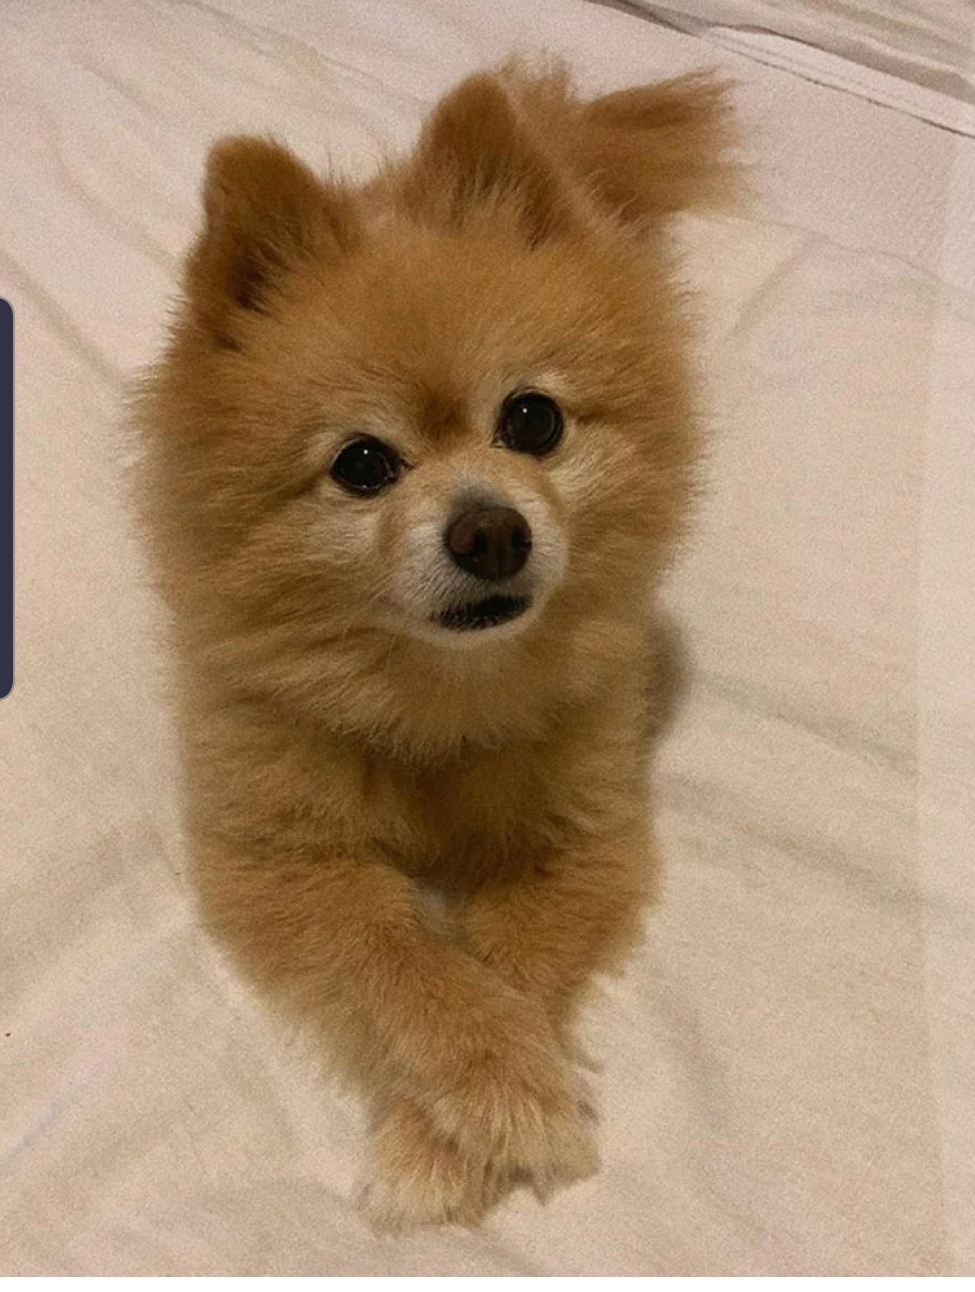 He was a dog, but became a rabbit: the owner decided to cut the dog’s hair herself during quarantine - Dog, Pomeranian, Стрижка, Awkward moment, Failure, Longpost